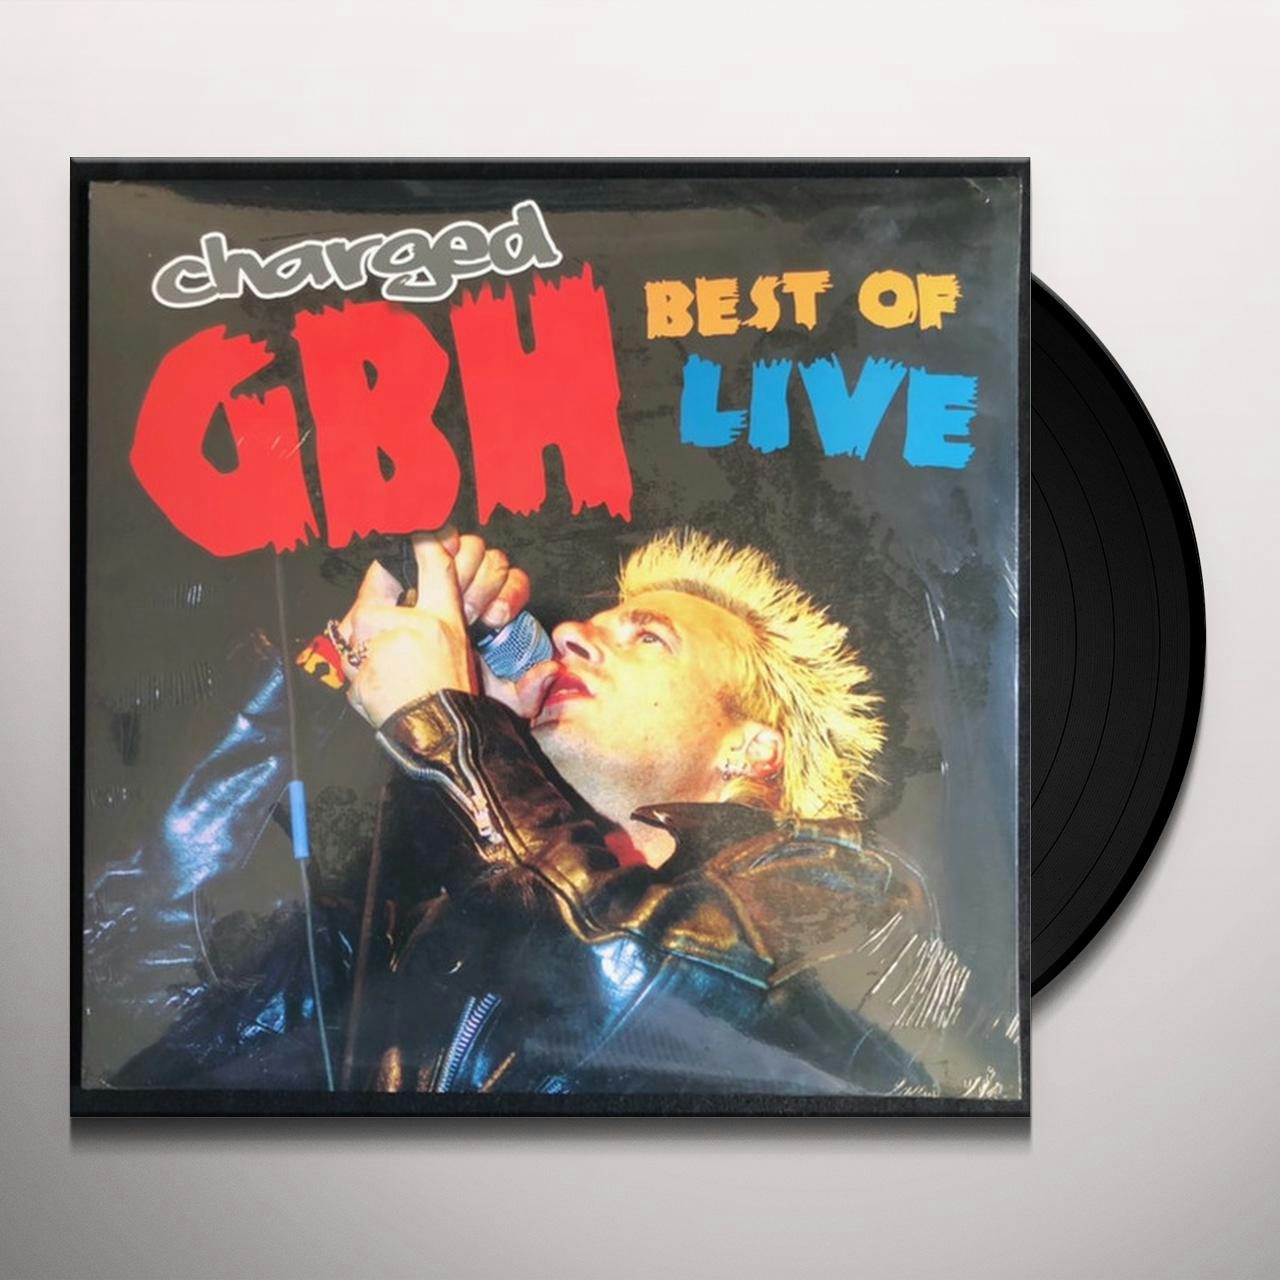 Best of Live [Blu-ray] [Import] g6bh9ry